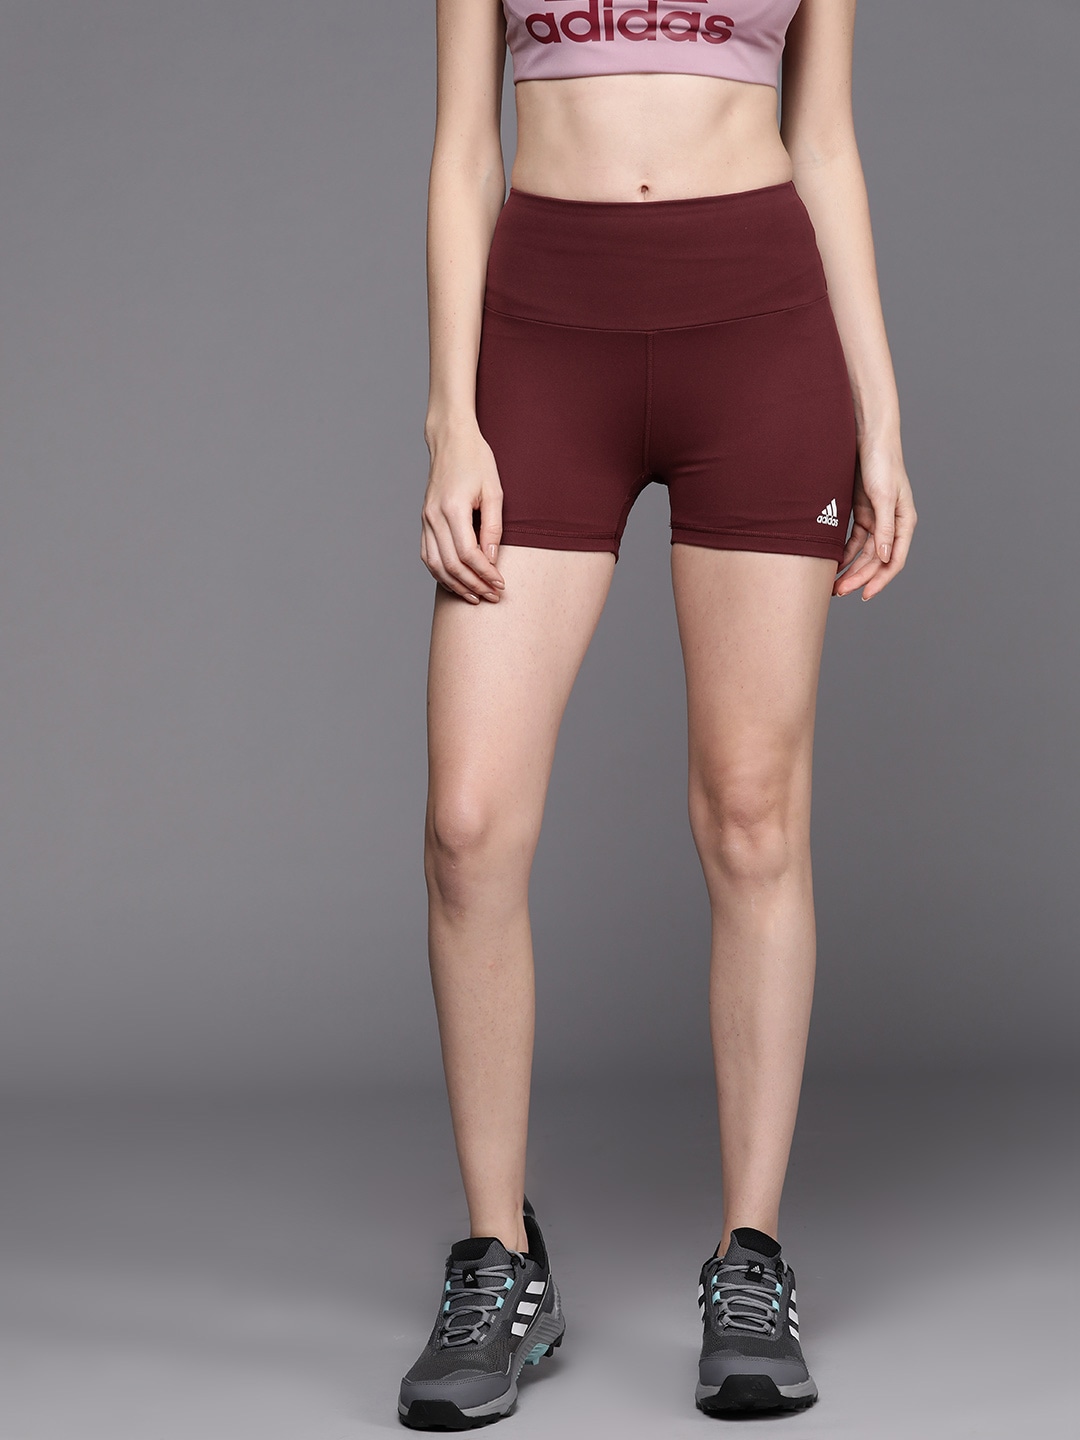 ADIDAS Women Maroon Solid Yoga Shorts Price in India